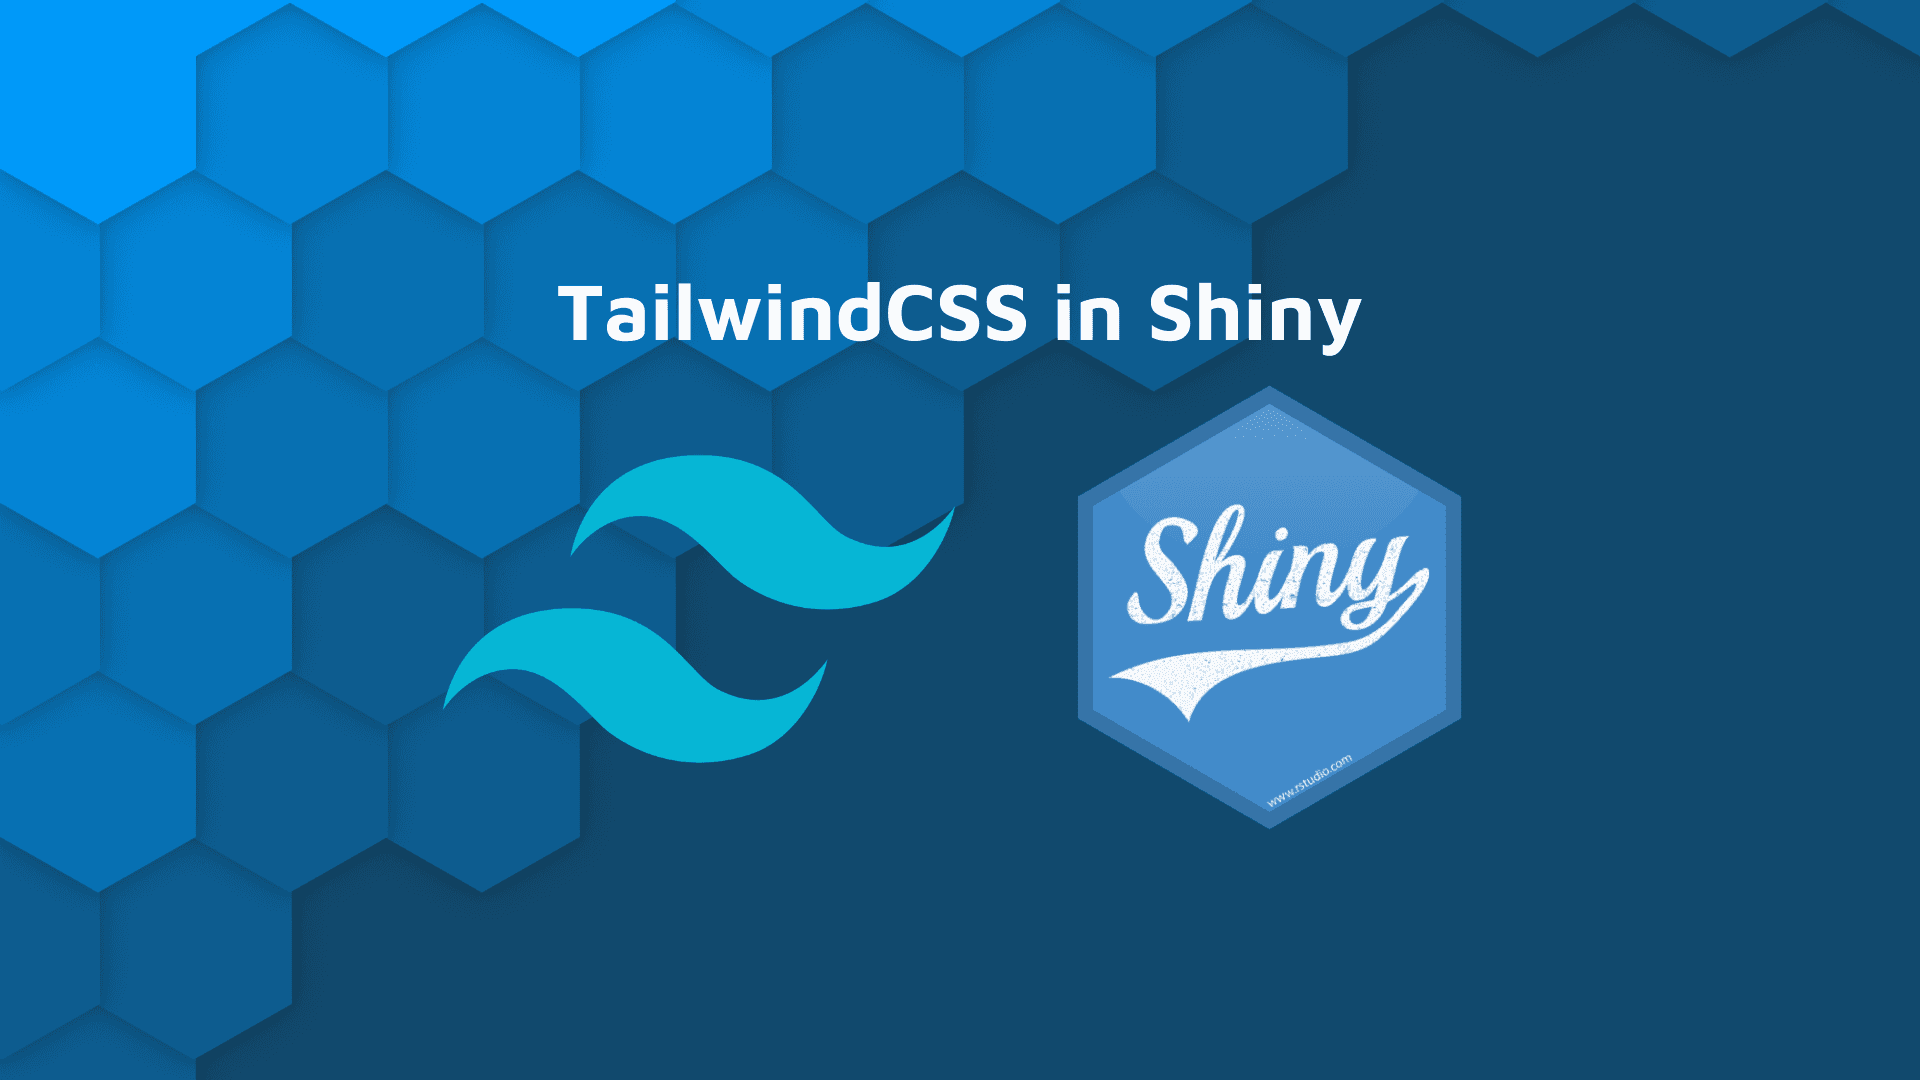 Blog banner with white text 'TailwindCSS in Shiny' with TailwindCSS and Shiny open source logos